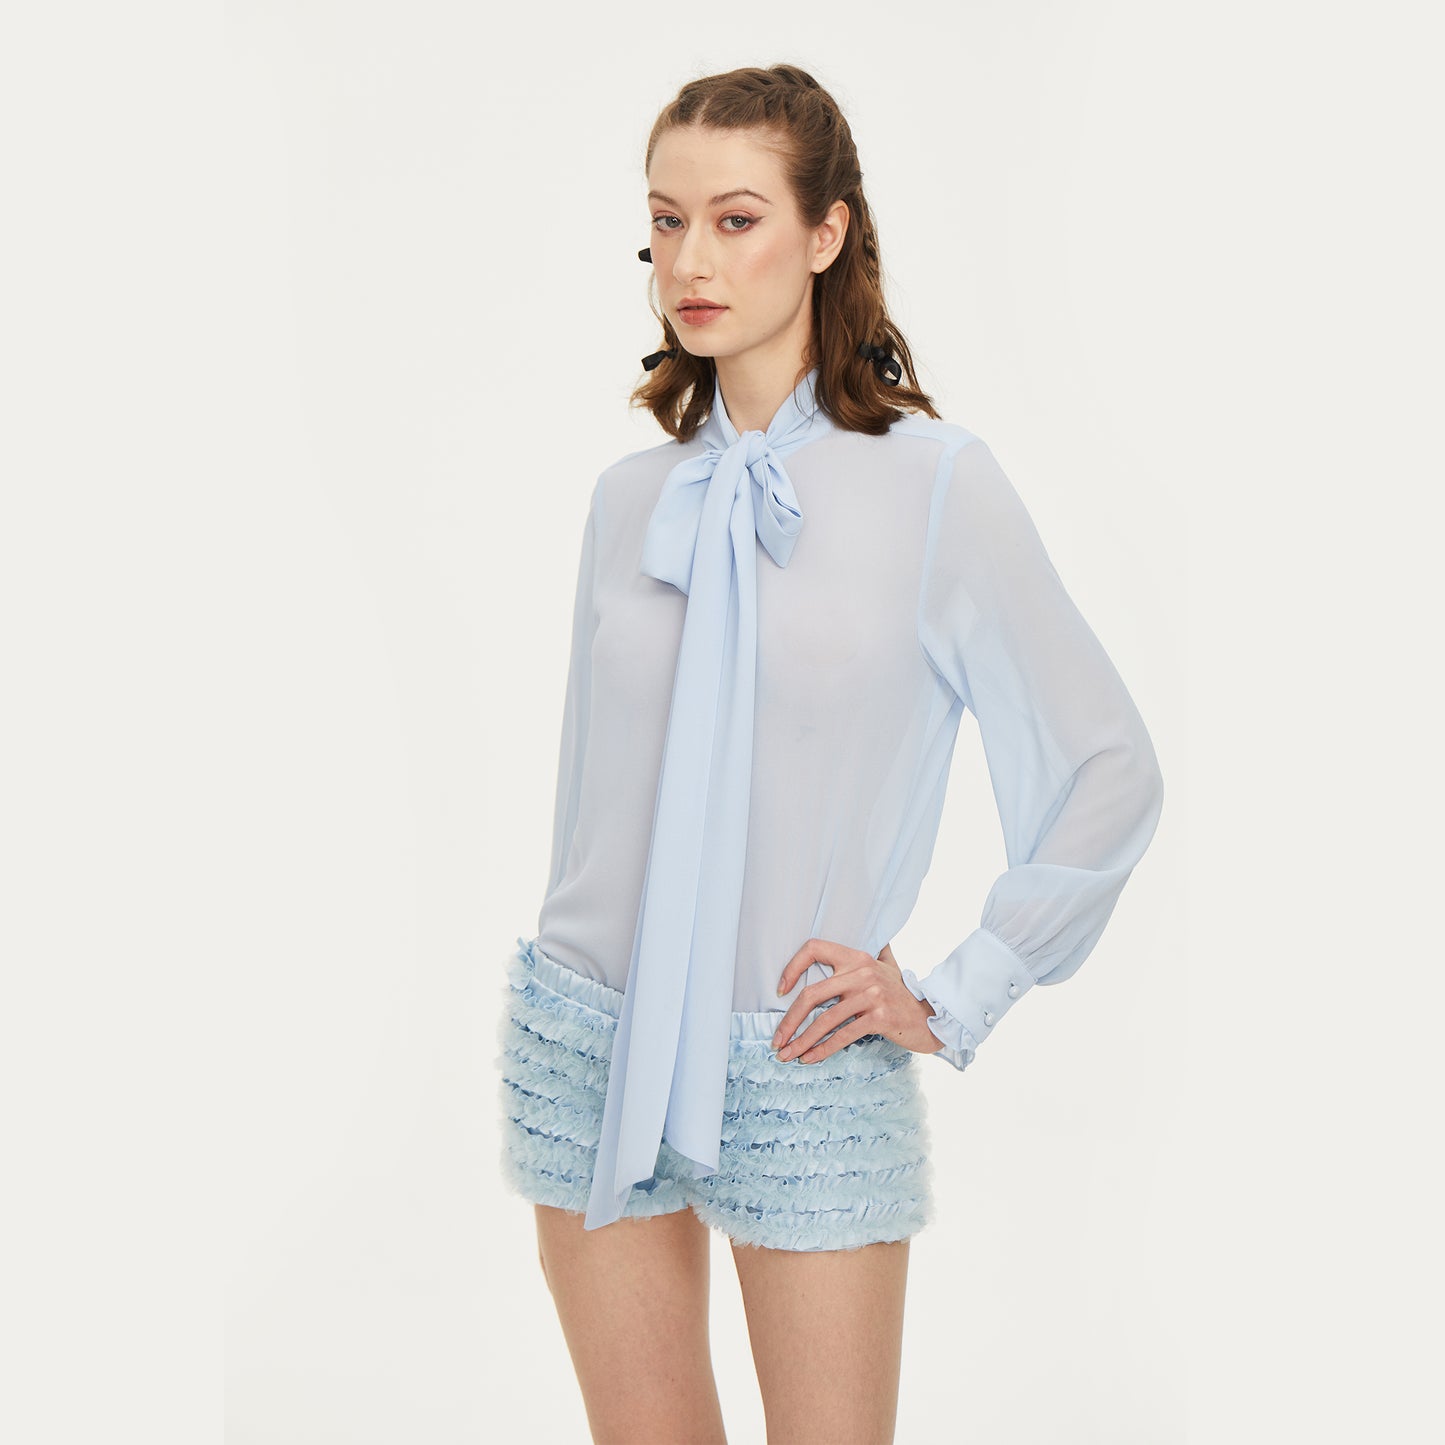 Soufflé Satin Tiered Shorts in Blue